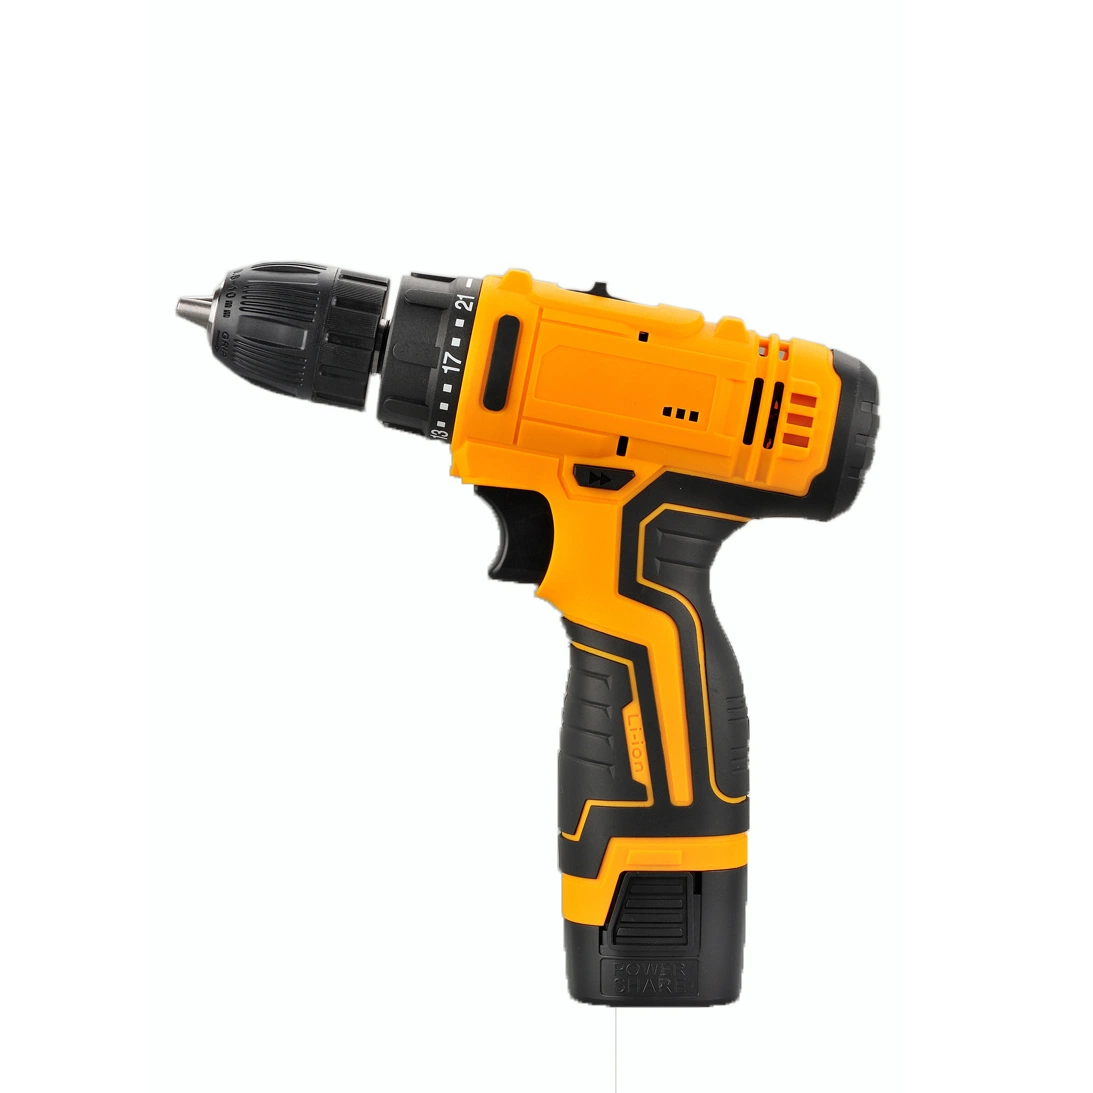 21V Power Tools Electric Cordless Drill/Screwdriver with Bits